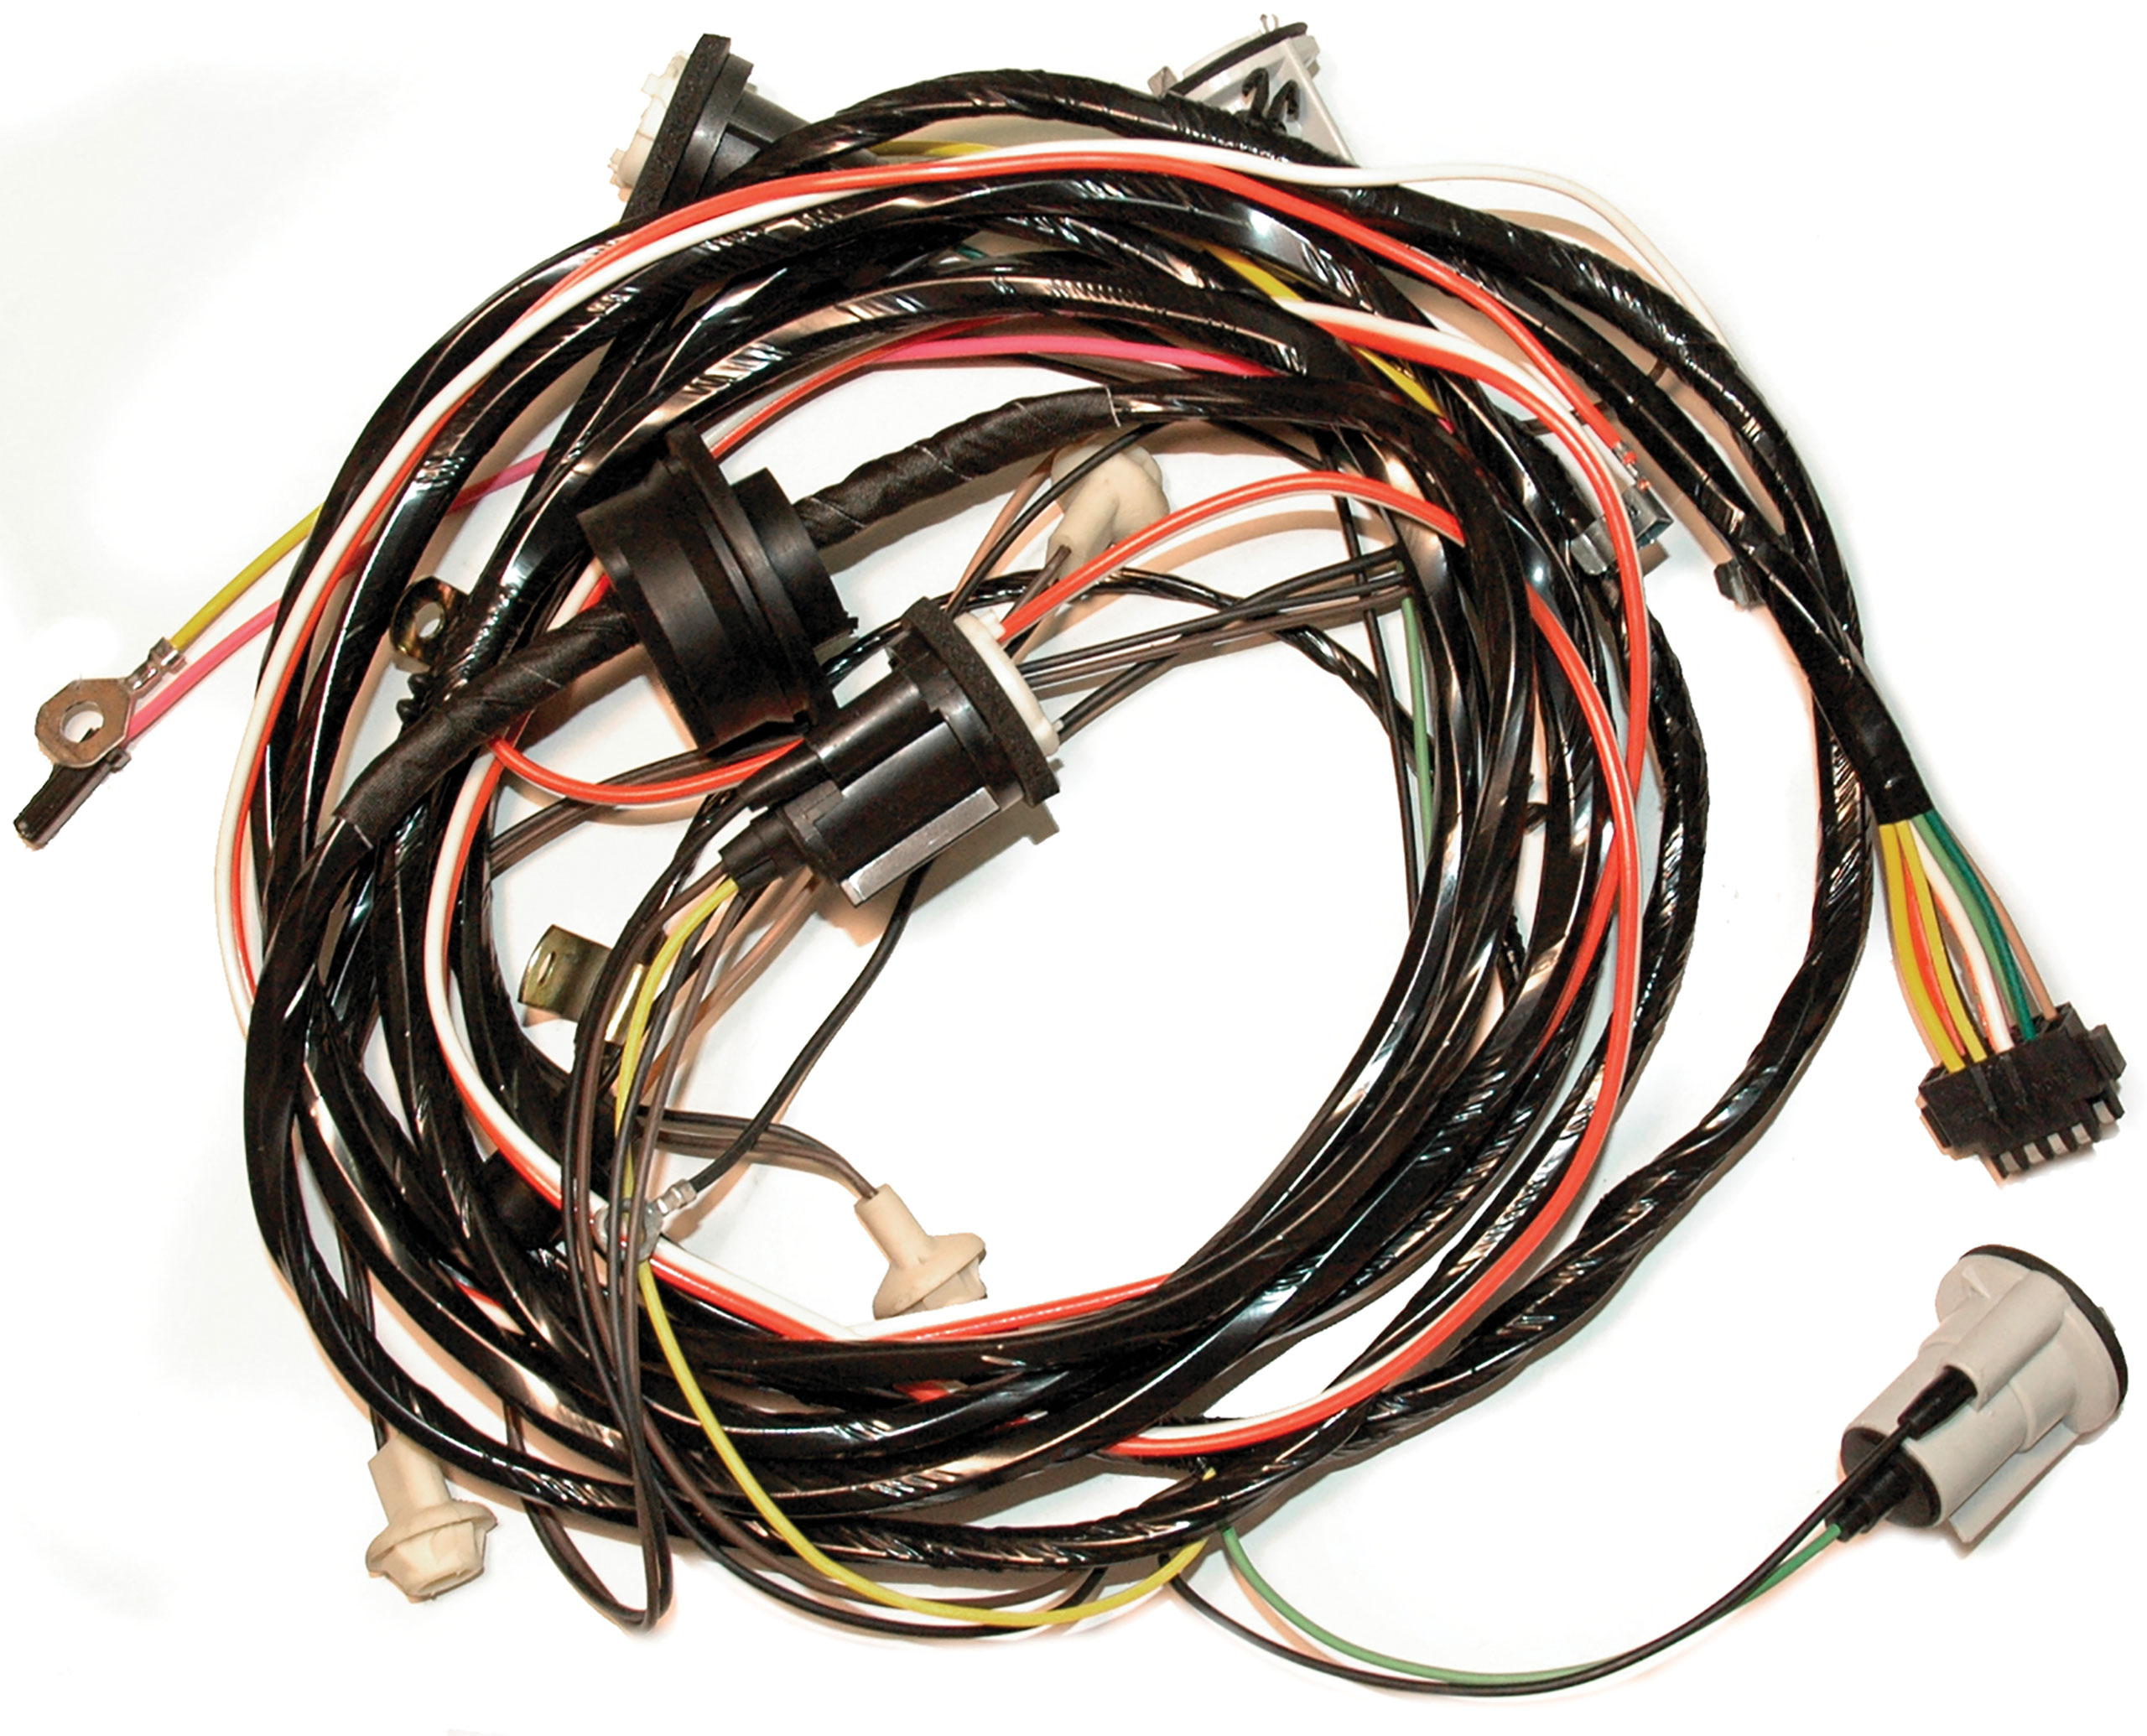 C3 1977 Chevrolet Corvette Harness. Rear 77 Early Before 3/2/77 - Lectric Limited, Inc.